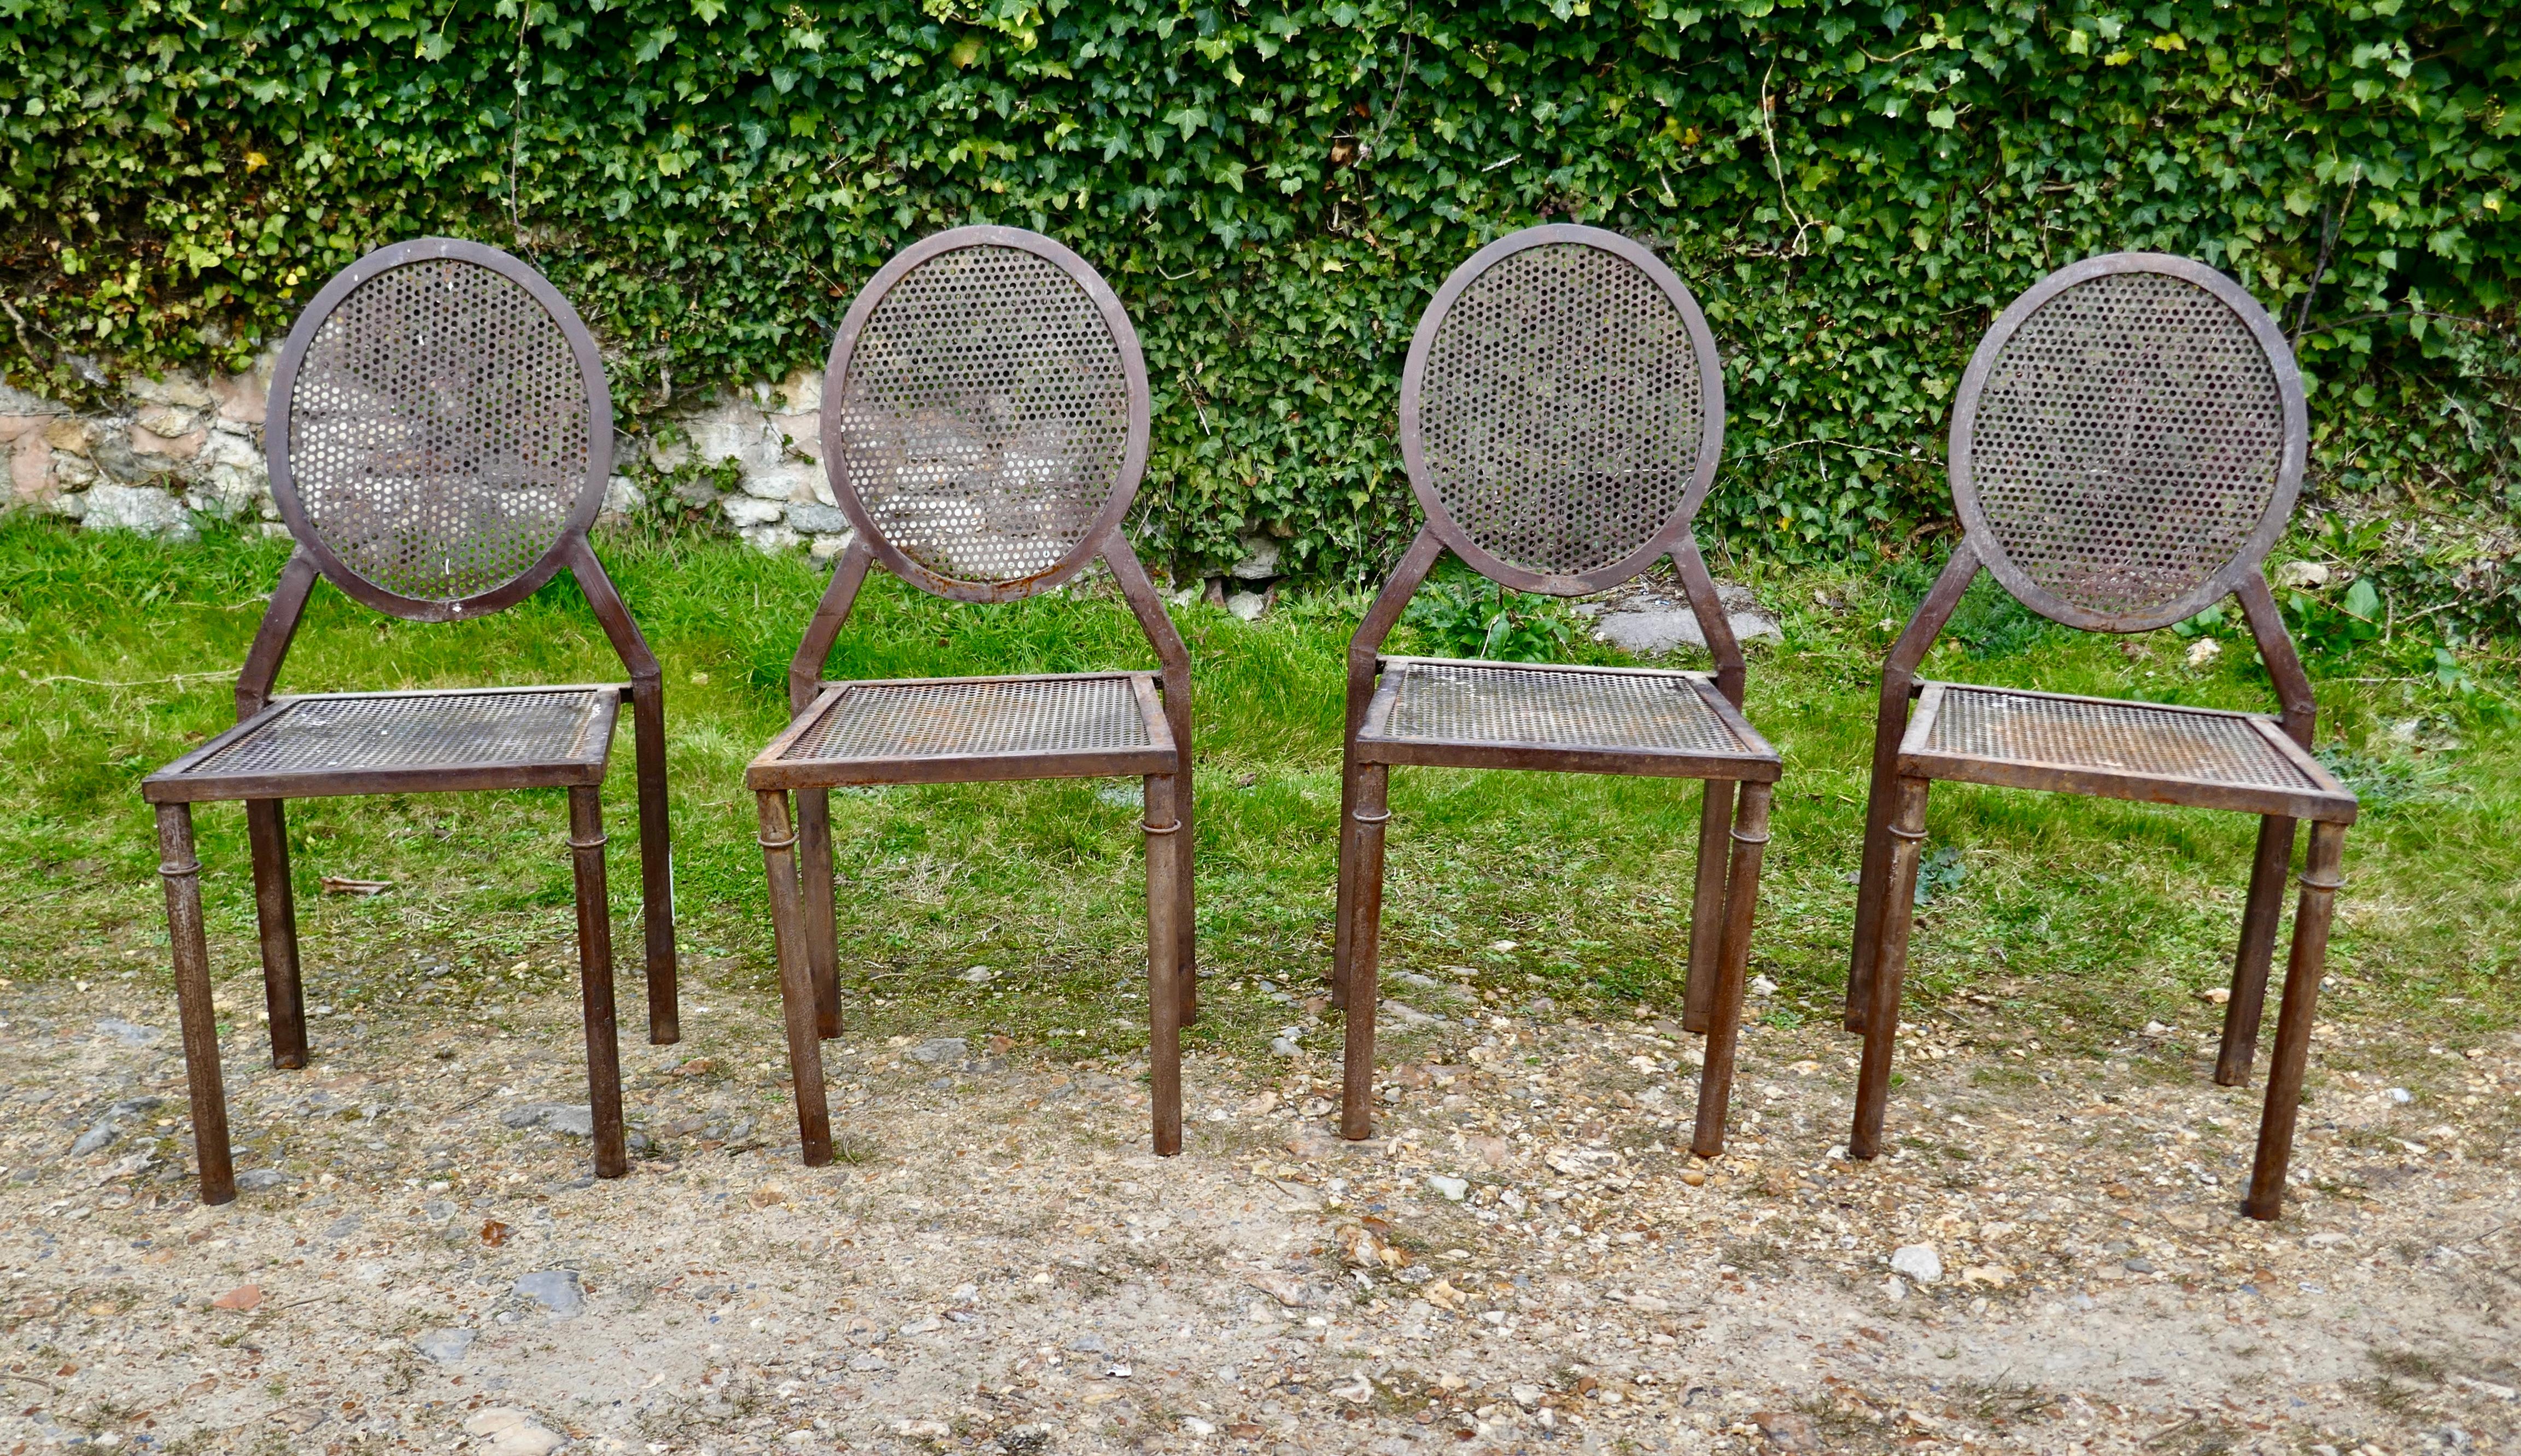 Set of 4 Brutalist iron stacking dining chairs

Great pieces, a set of good heavy iron chairs which have square seats and round backs with inset heavy mesh
These stylish chairs would work as well in a garden or a modernist setting indoors with